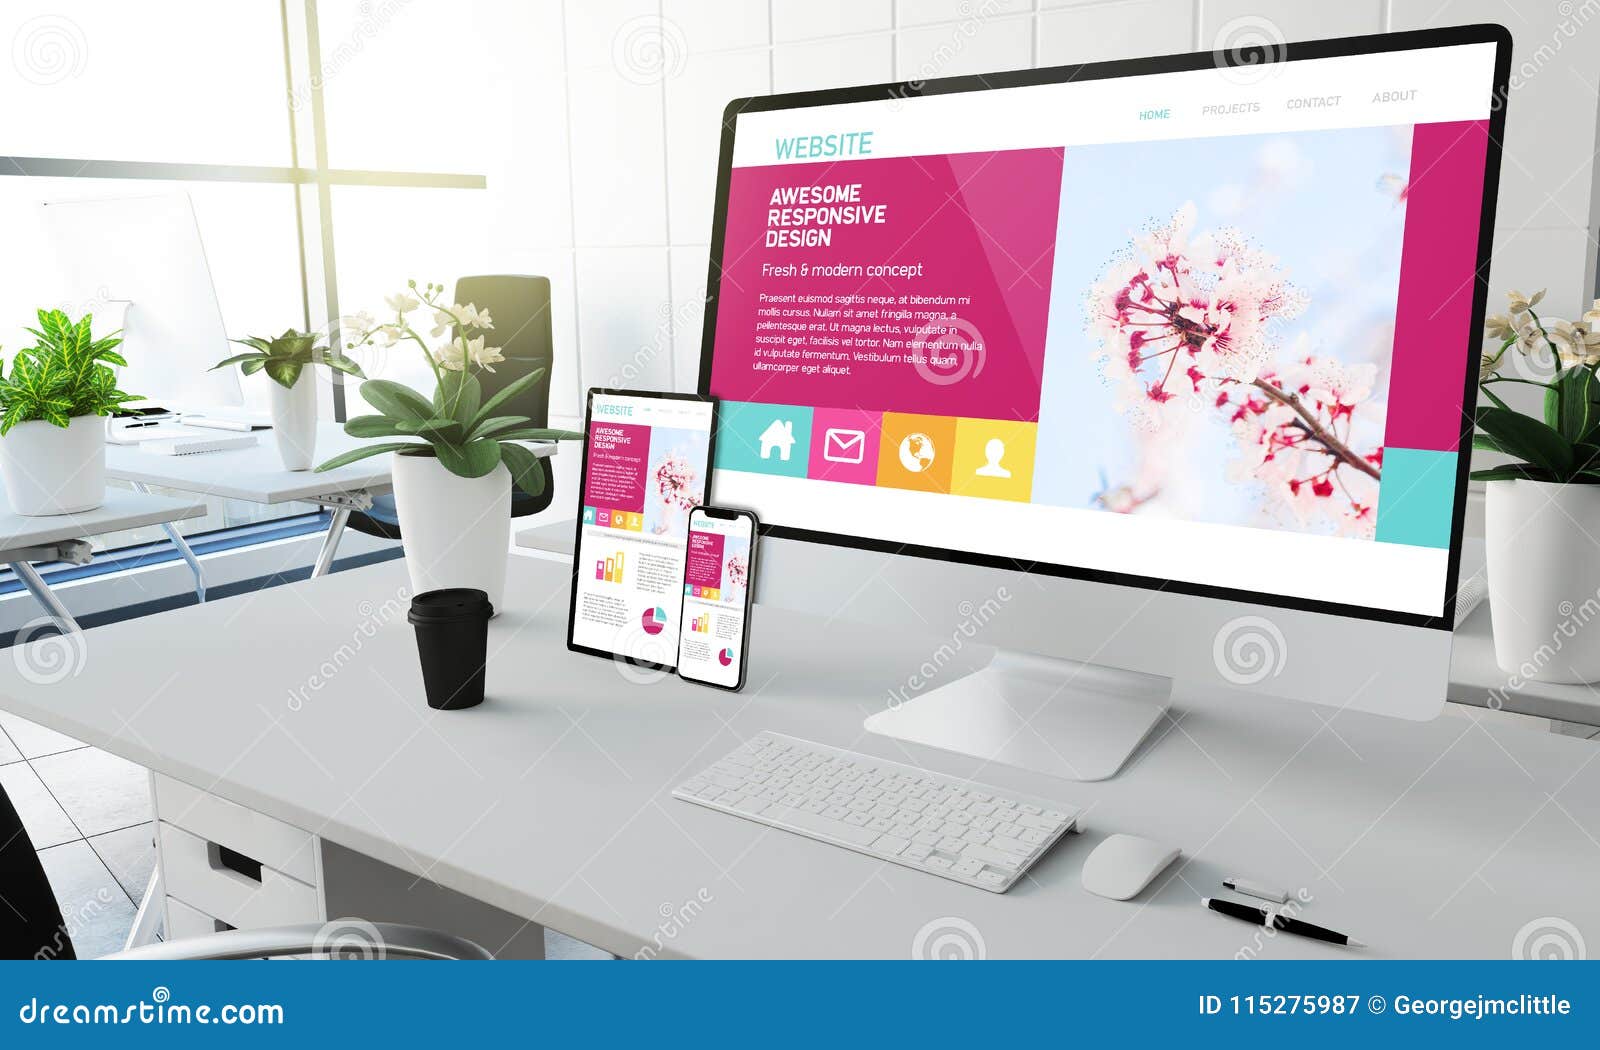 Download Awesome Responsive Design Devices Mockup Stock ...